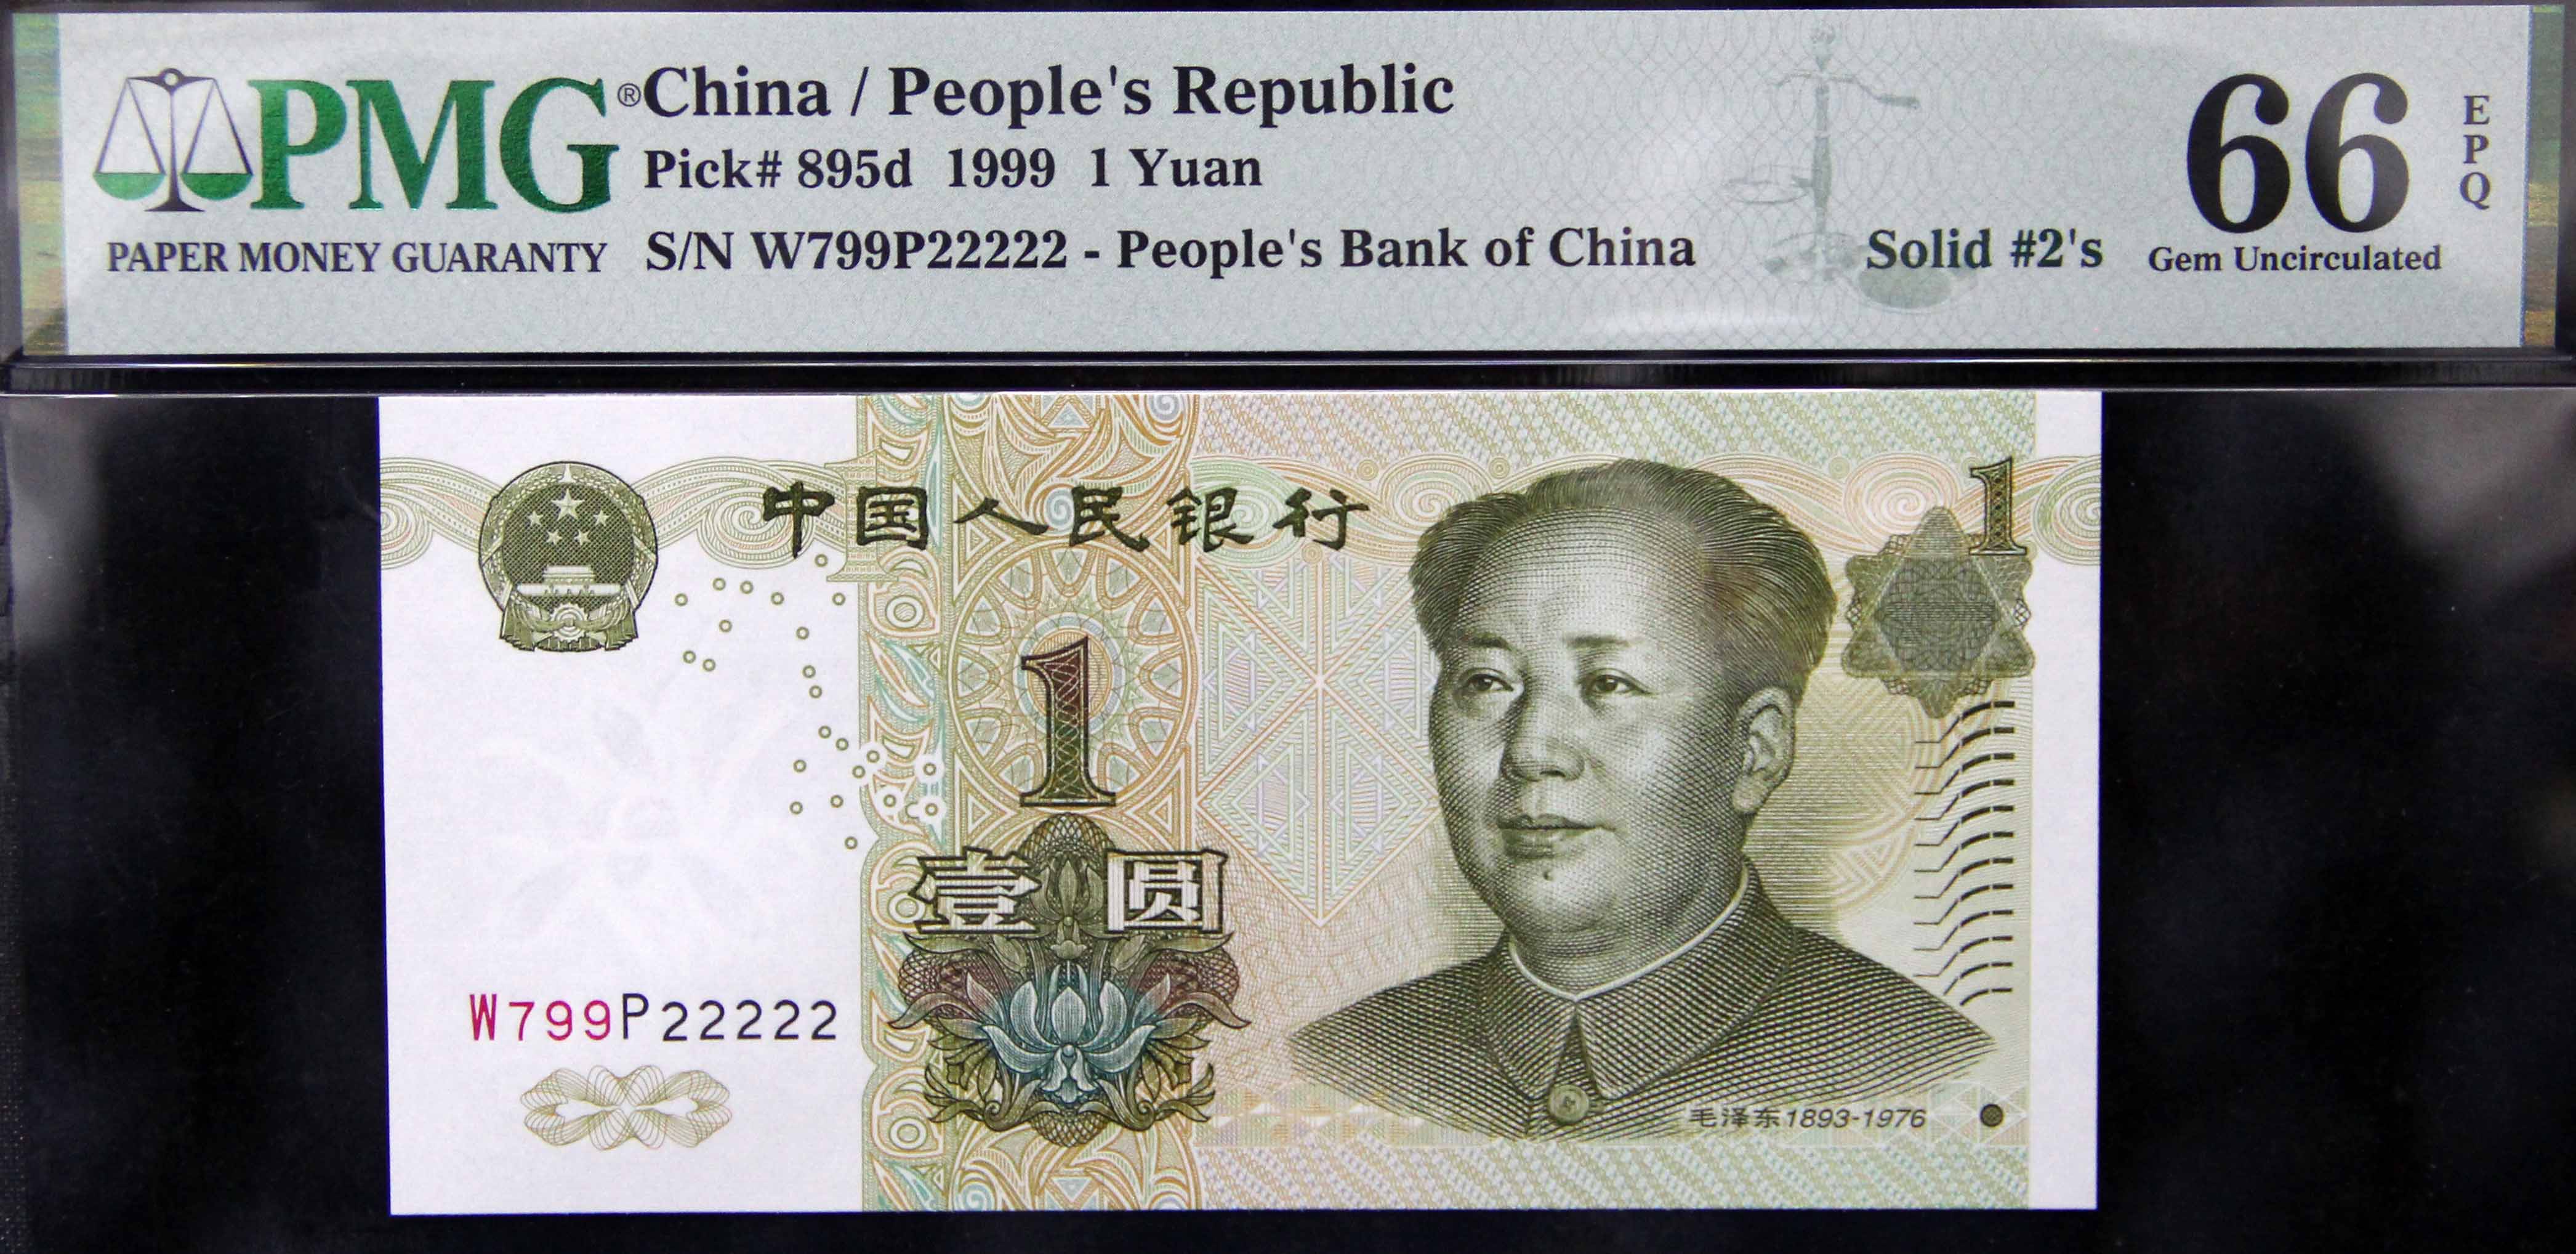 China, 1999, 1 Yuan, P-895d, S/N. W799 P22222, Solid # 2's, PMG 